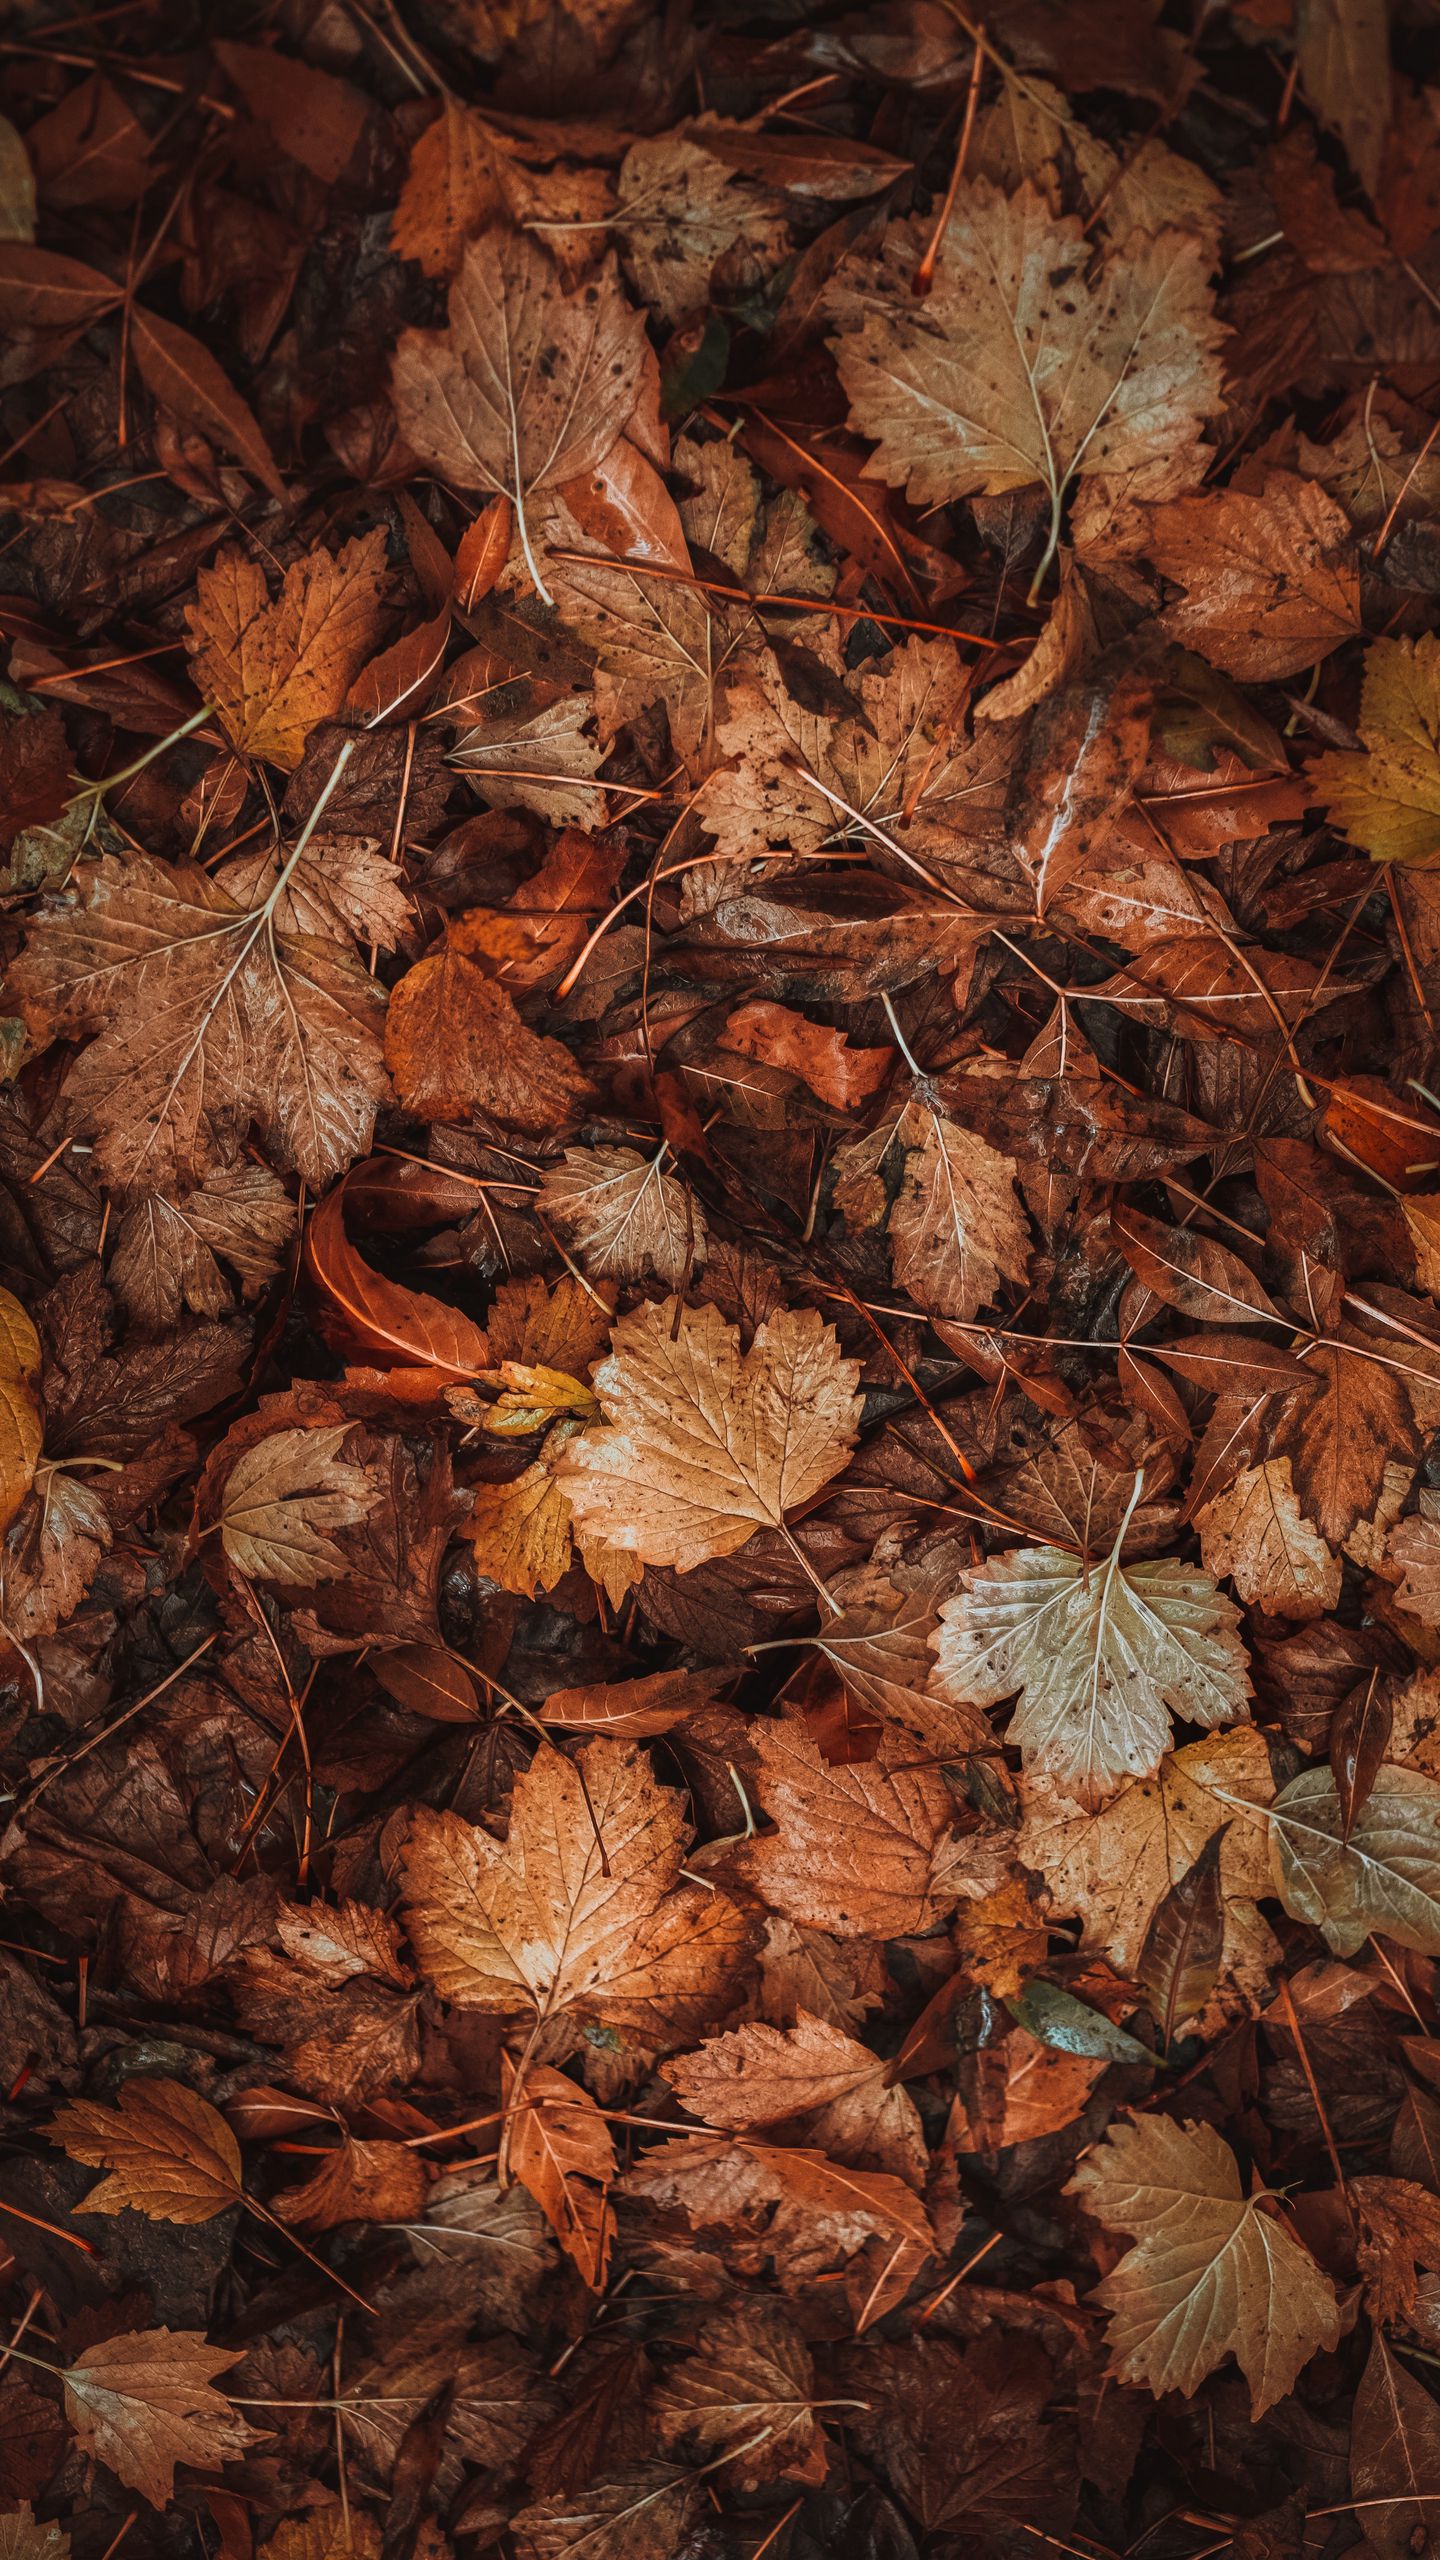 Download wallpaper 1440x2560 leaves, dry, brown, autumn, fallen leaves qhd  samsung galaxy s6, s7, edge, note, lg g4 hd background